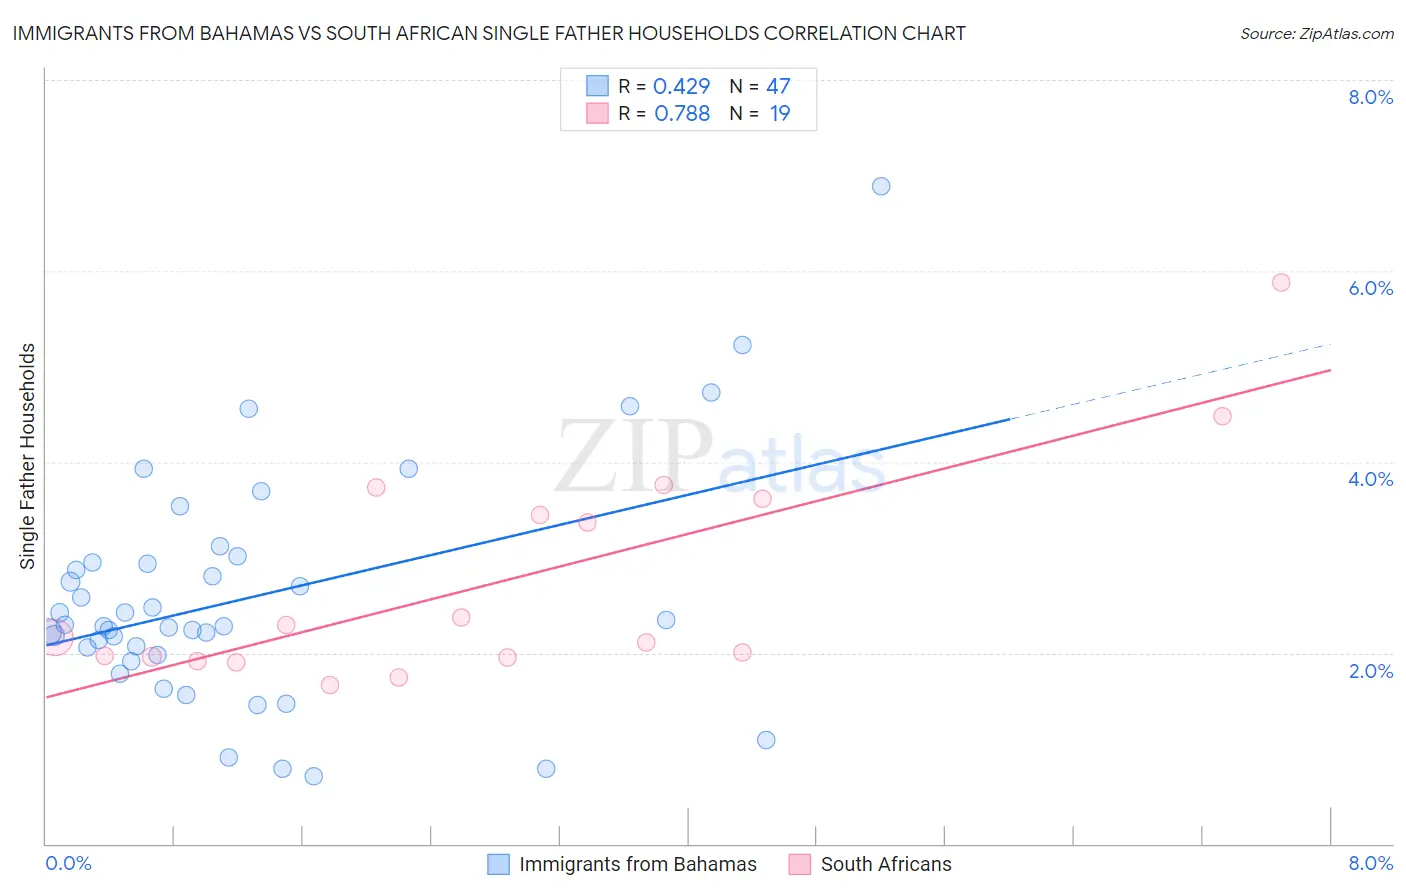 Immigrants from Bahamas vs South African Single Father Households